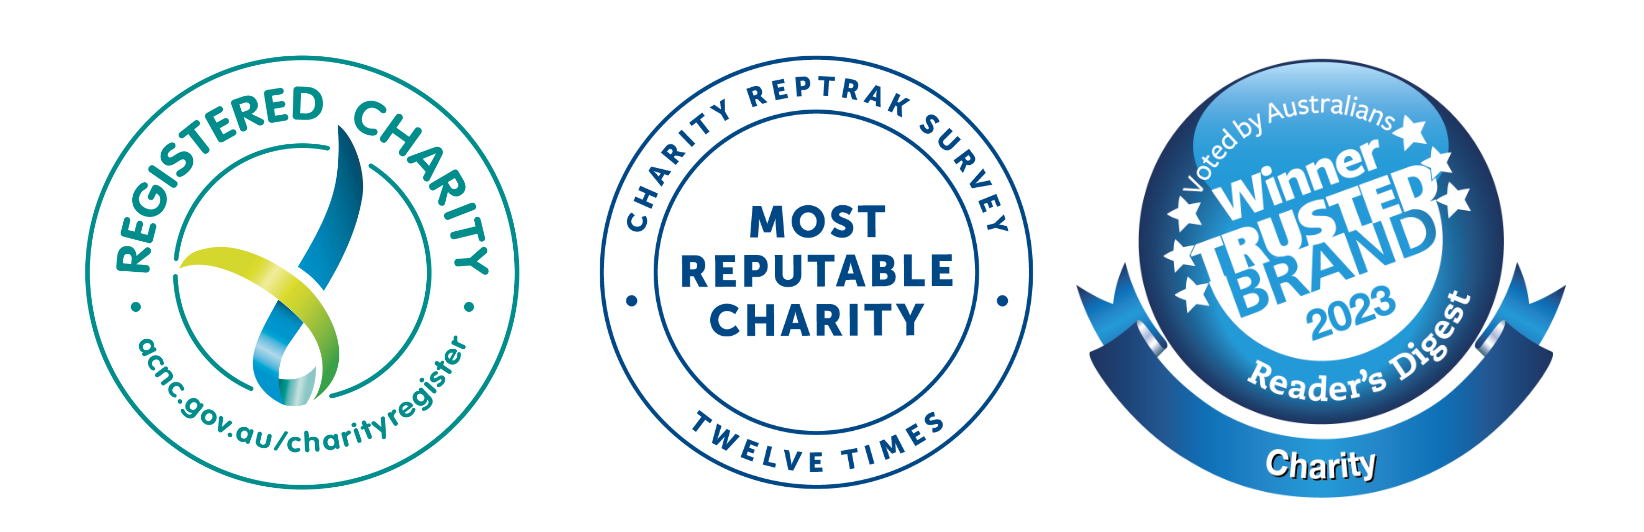 ACNC registered charity, Twelve Times most reputable charity, and Readers Digest 2024 trusted brand winner.